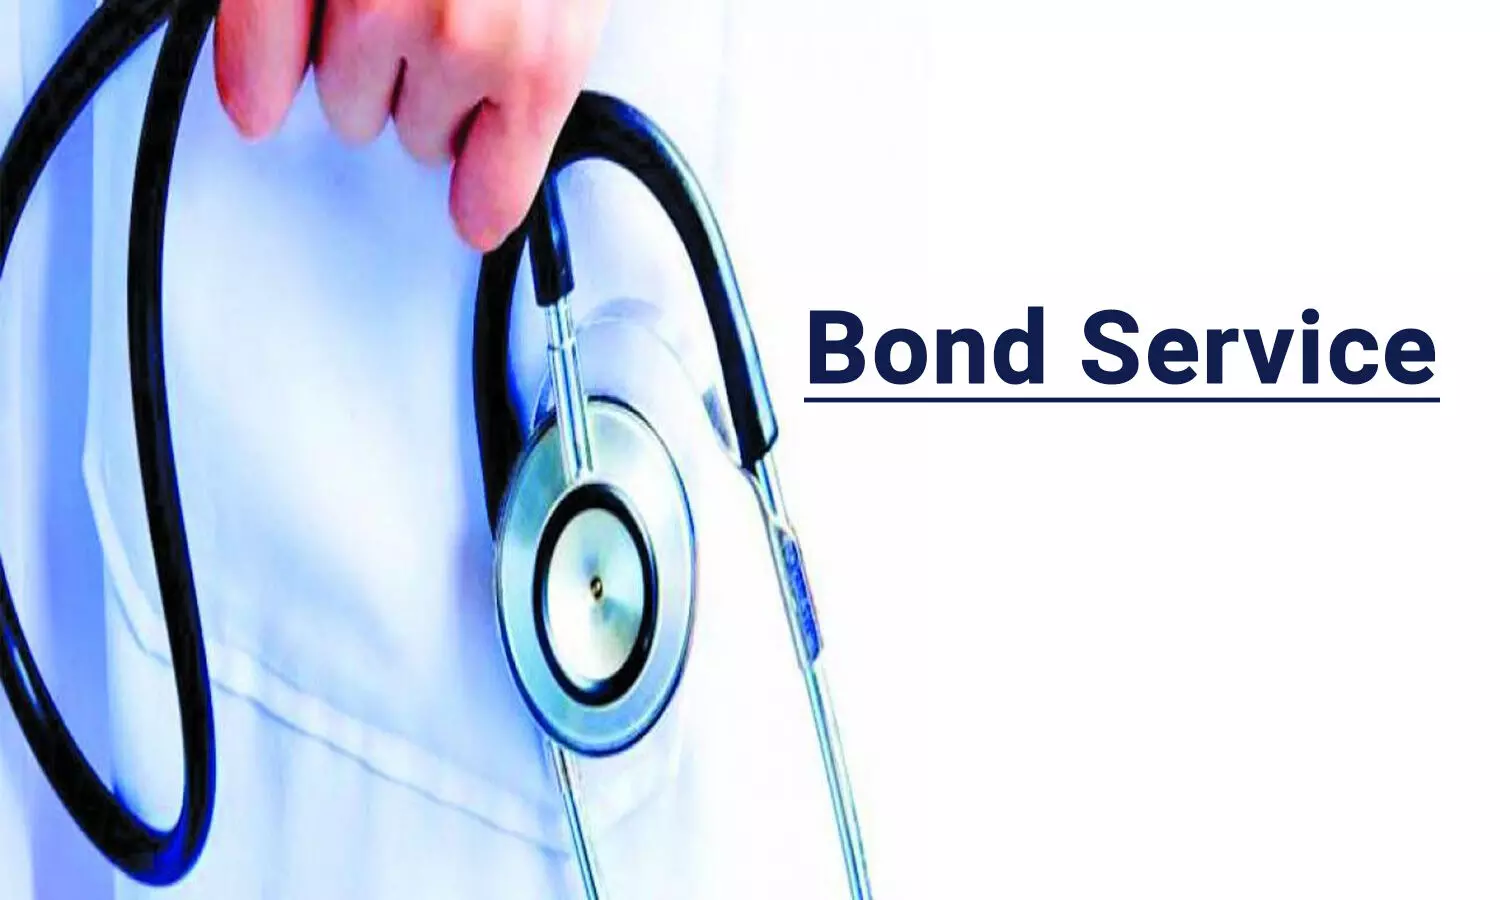 DMER notifies on Allotment of Bond service to MBBS graduates who have completed internship